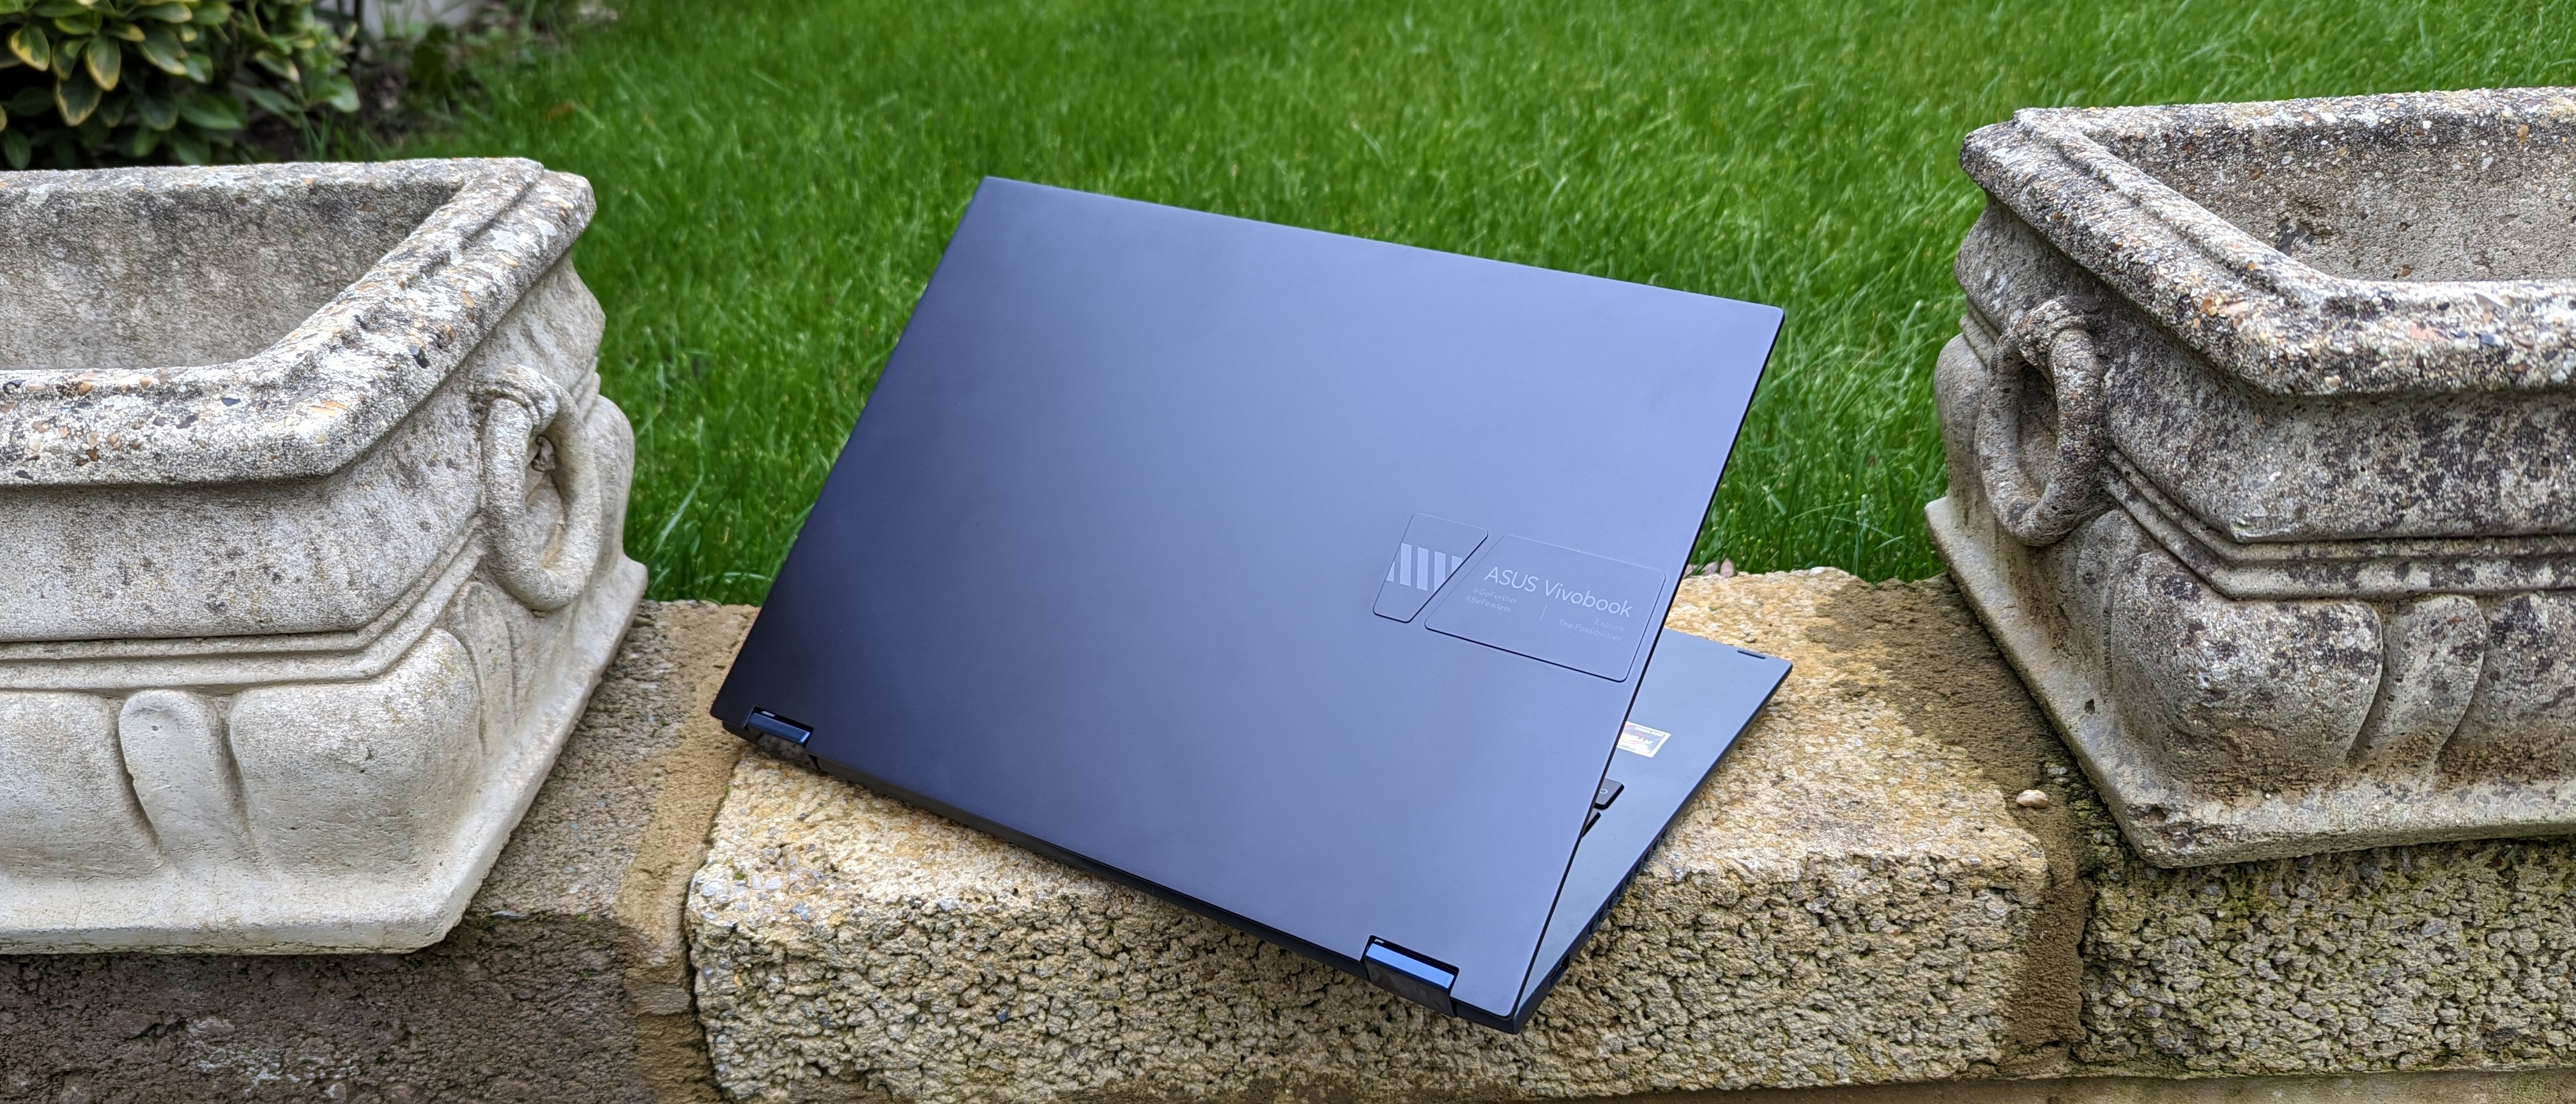 Asus Vivobook S 14 Flip OLED review: Incredible value